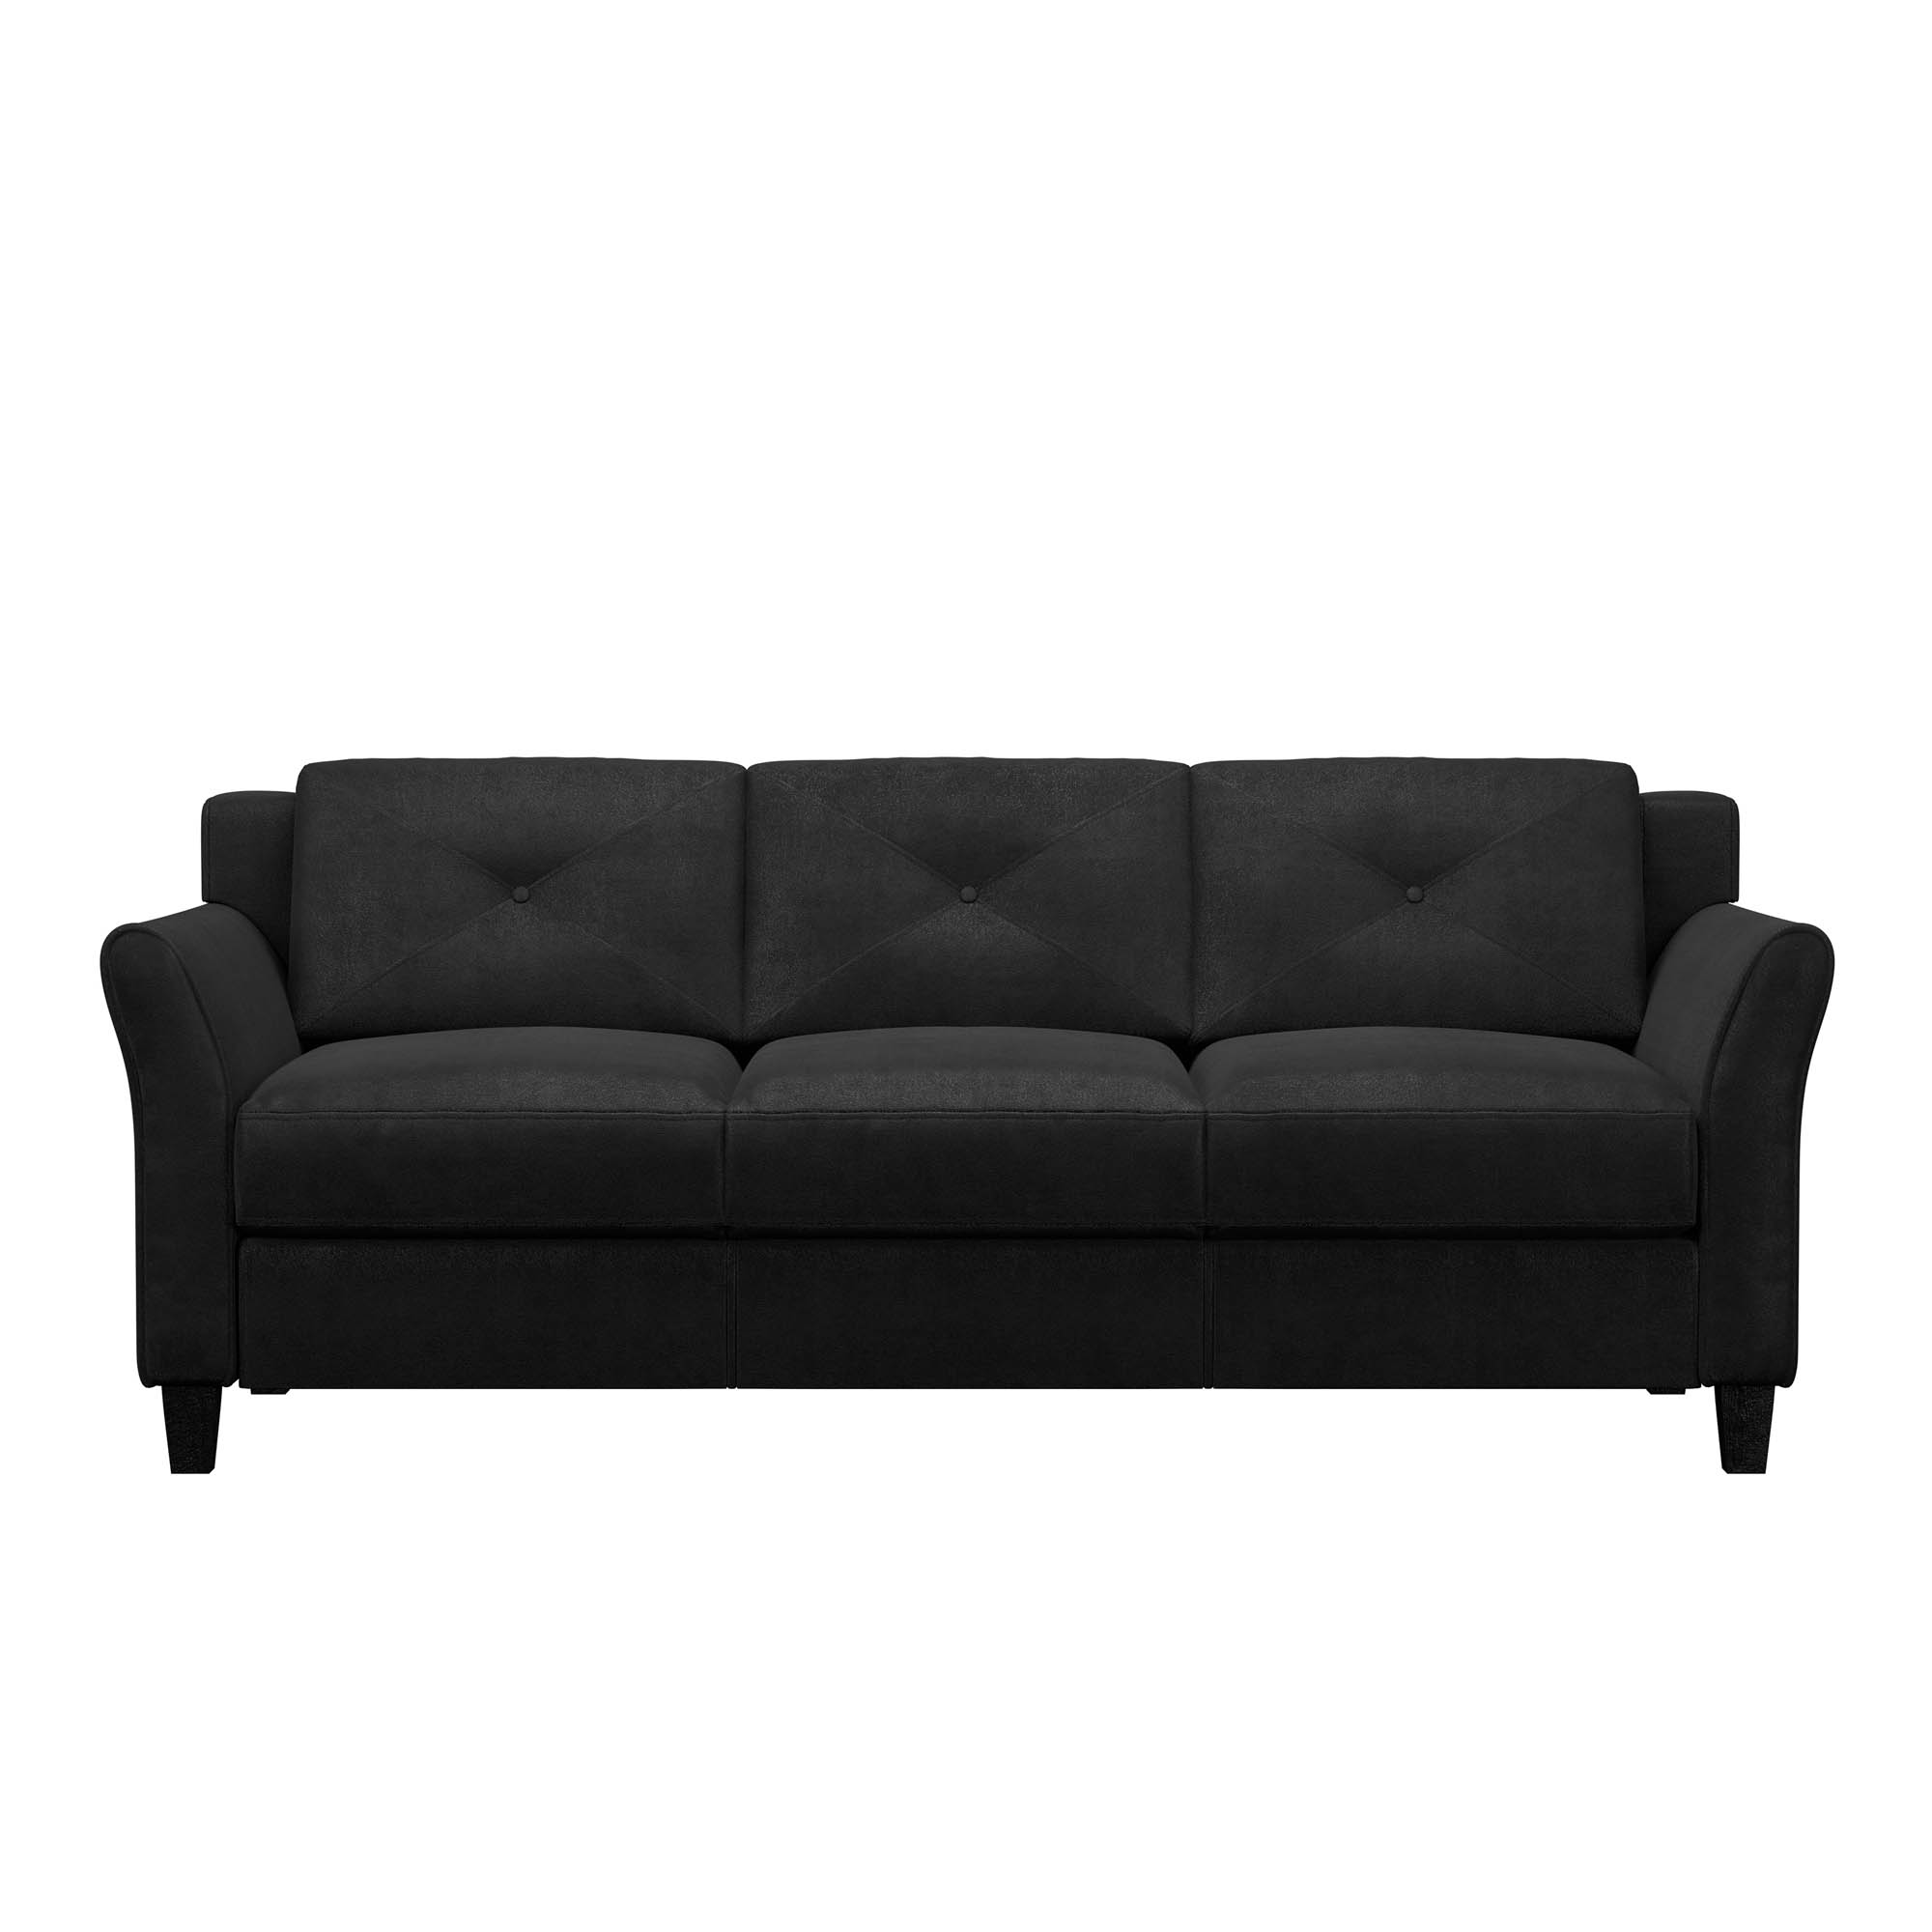 Lifestyle Solutions Taryn Curved Arms Sofa, Black Fabric - image 2 of 18